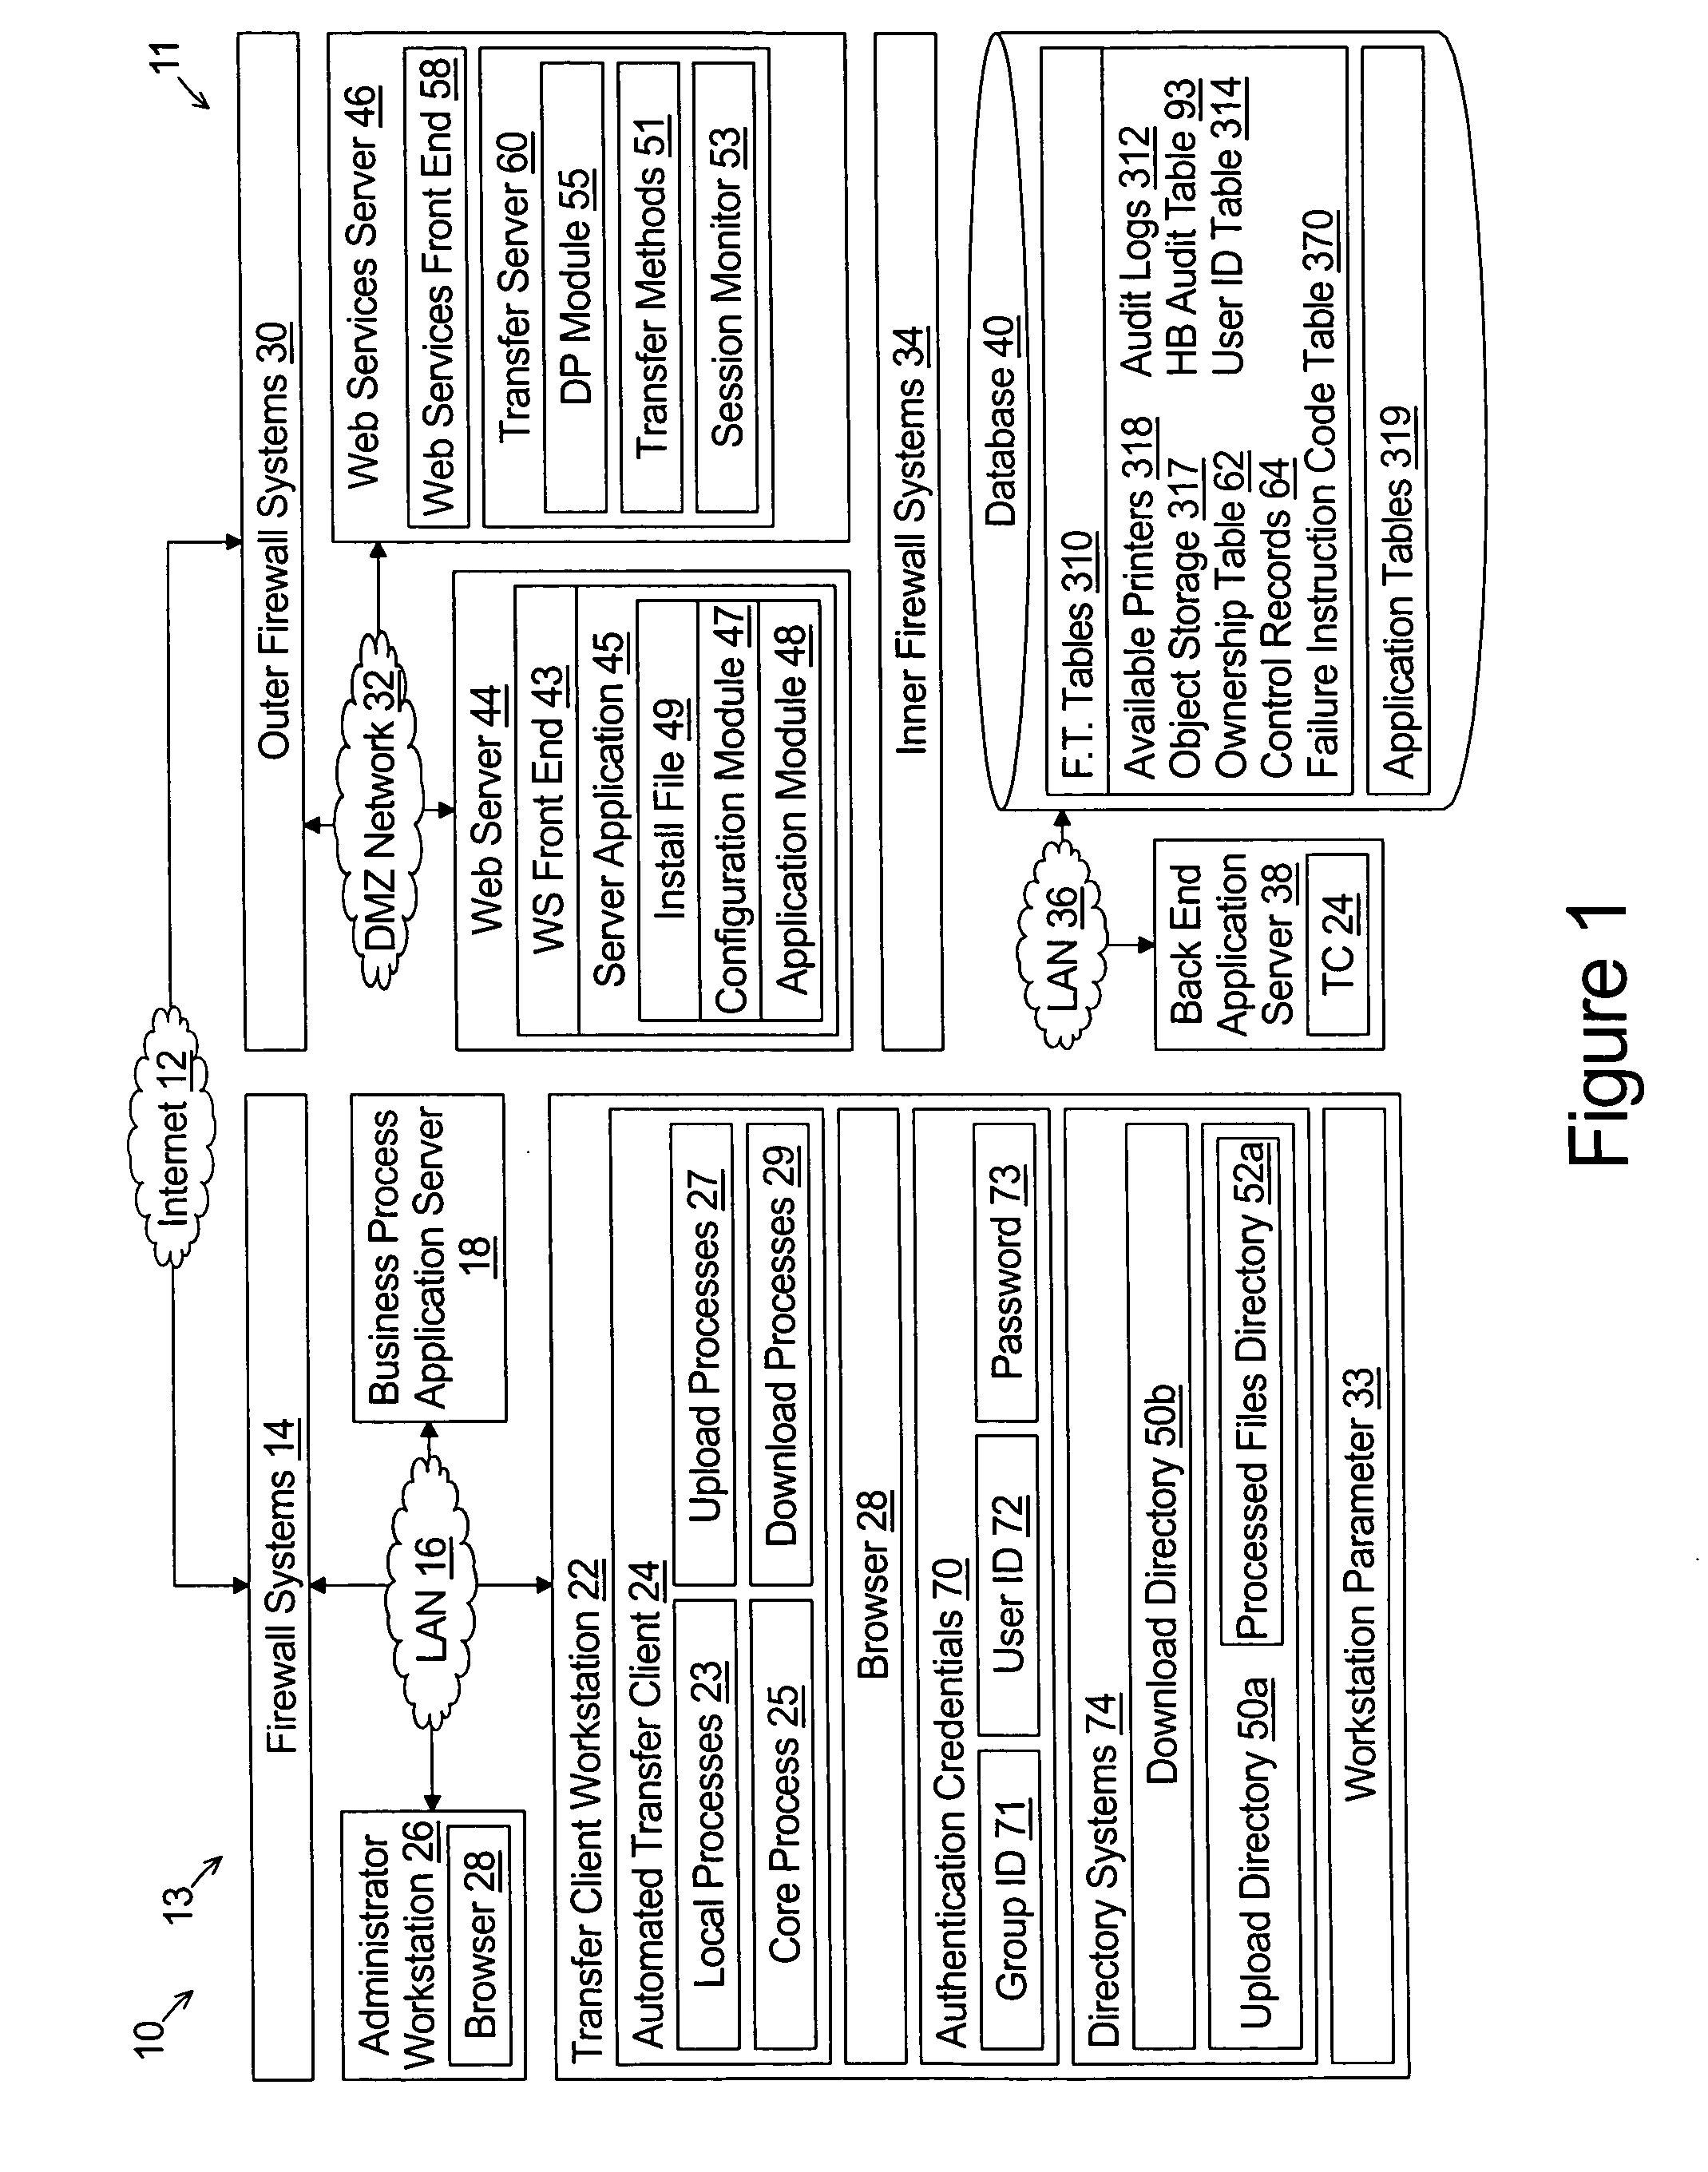 Secure web server system for unattended remote file and message transfer